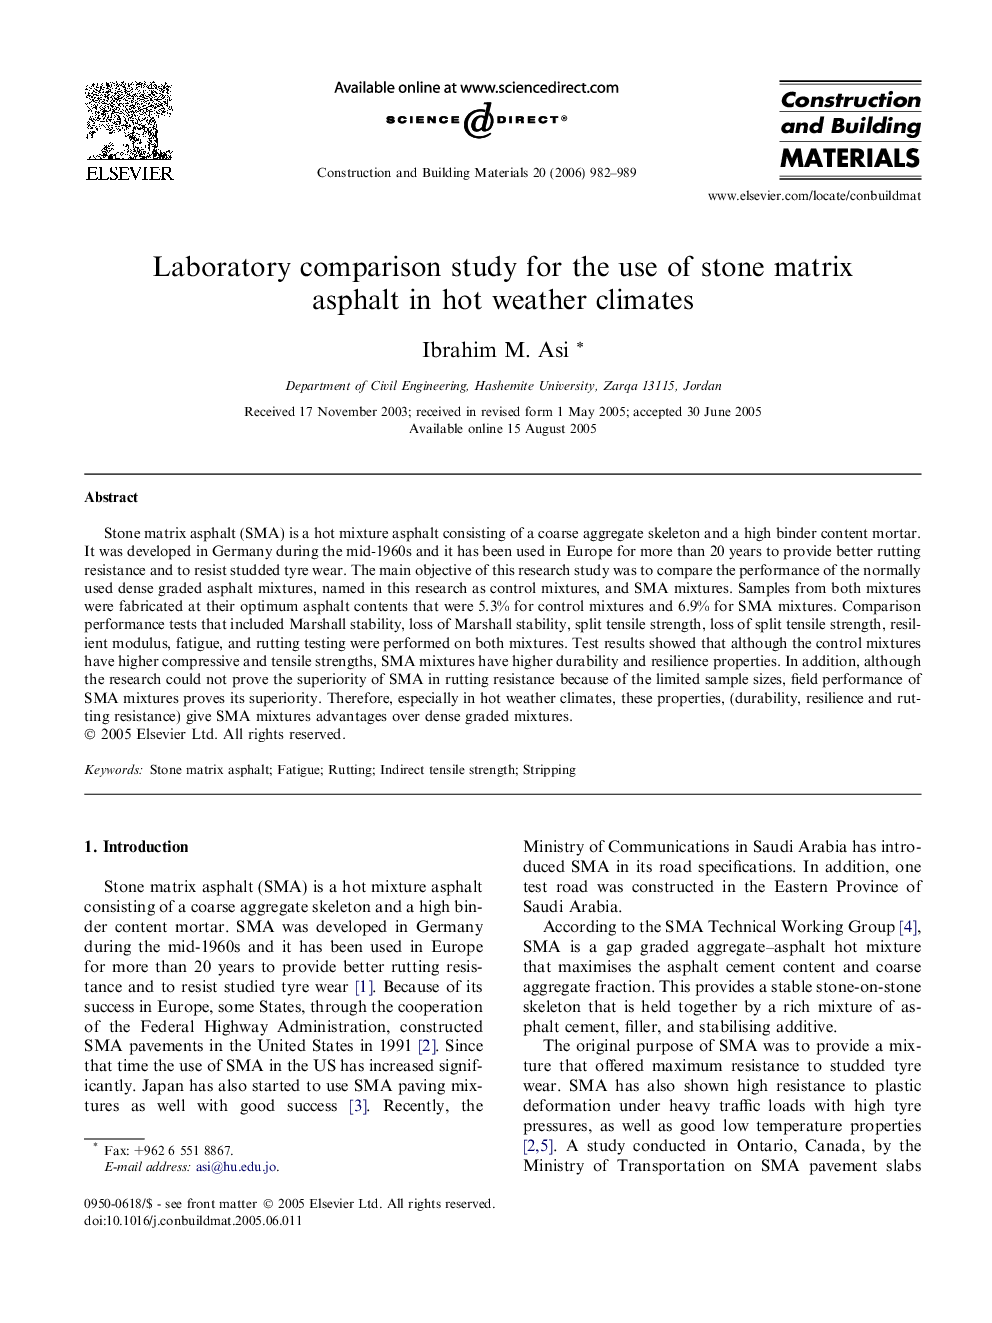 Laboratory comparison study for the use of stone matrix asphalt in hot weather climates